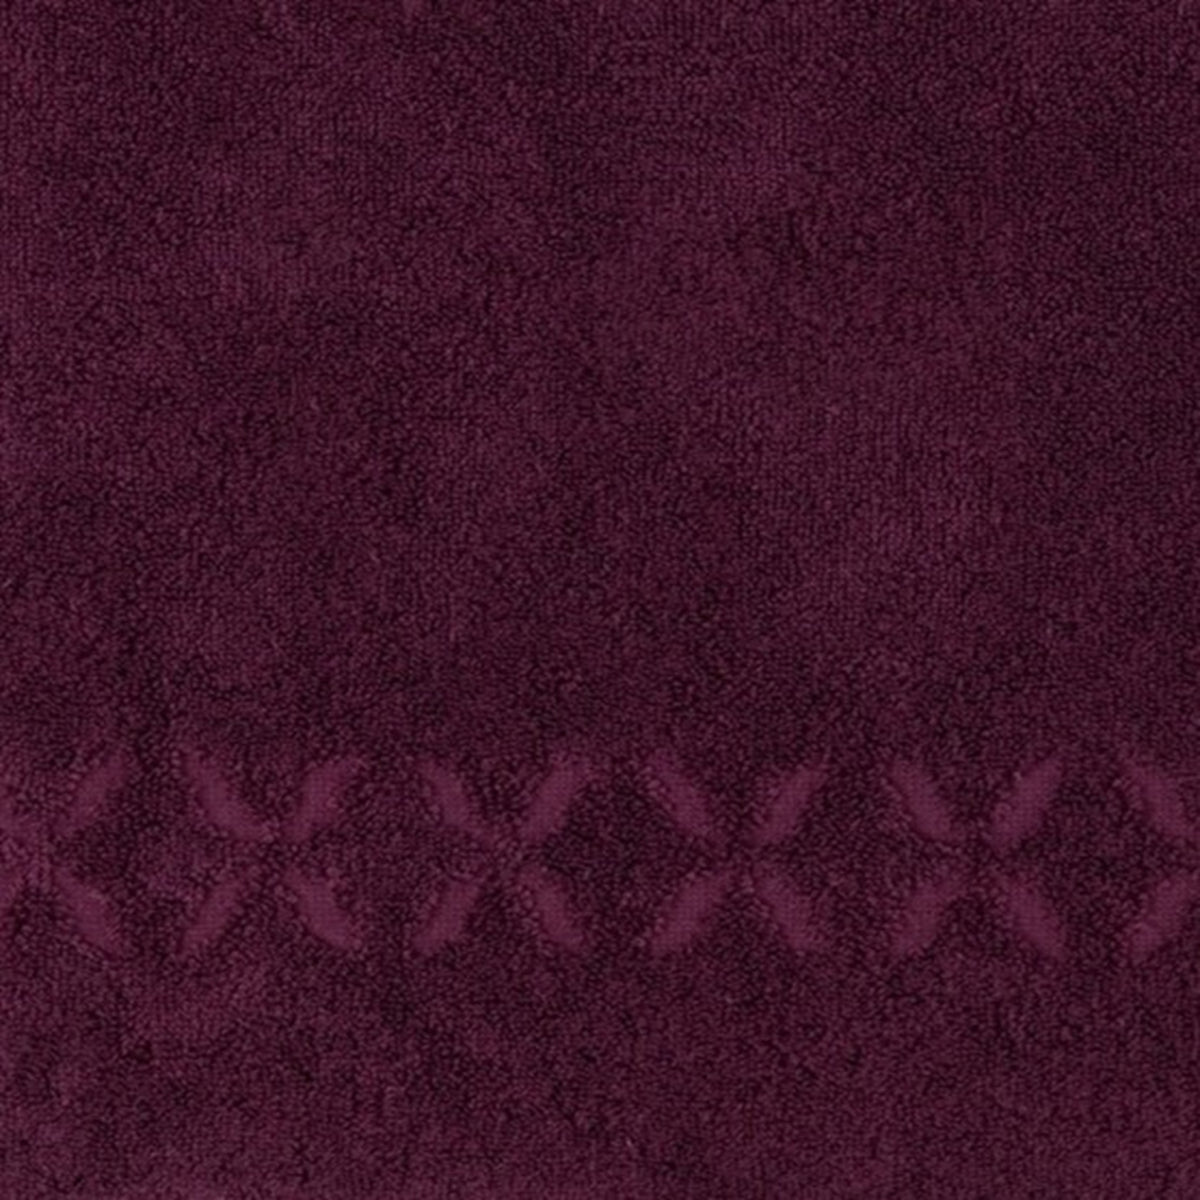 Swatch Sample of Yves Delorme Nature Bath Towels and Mats in Prune Color